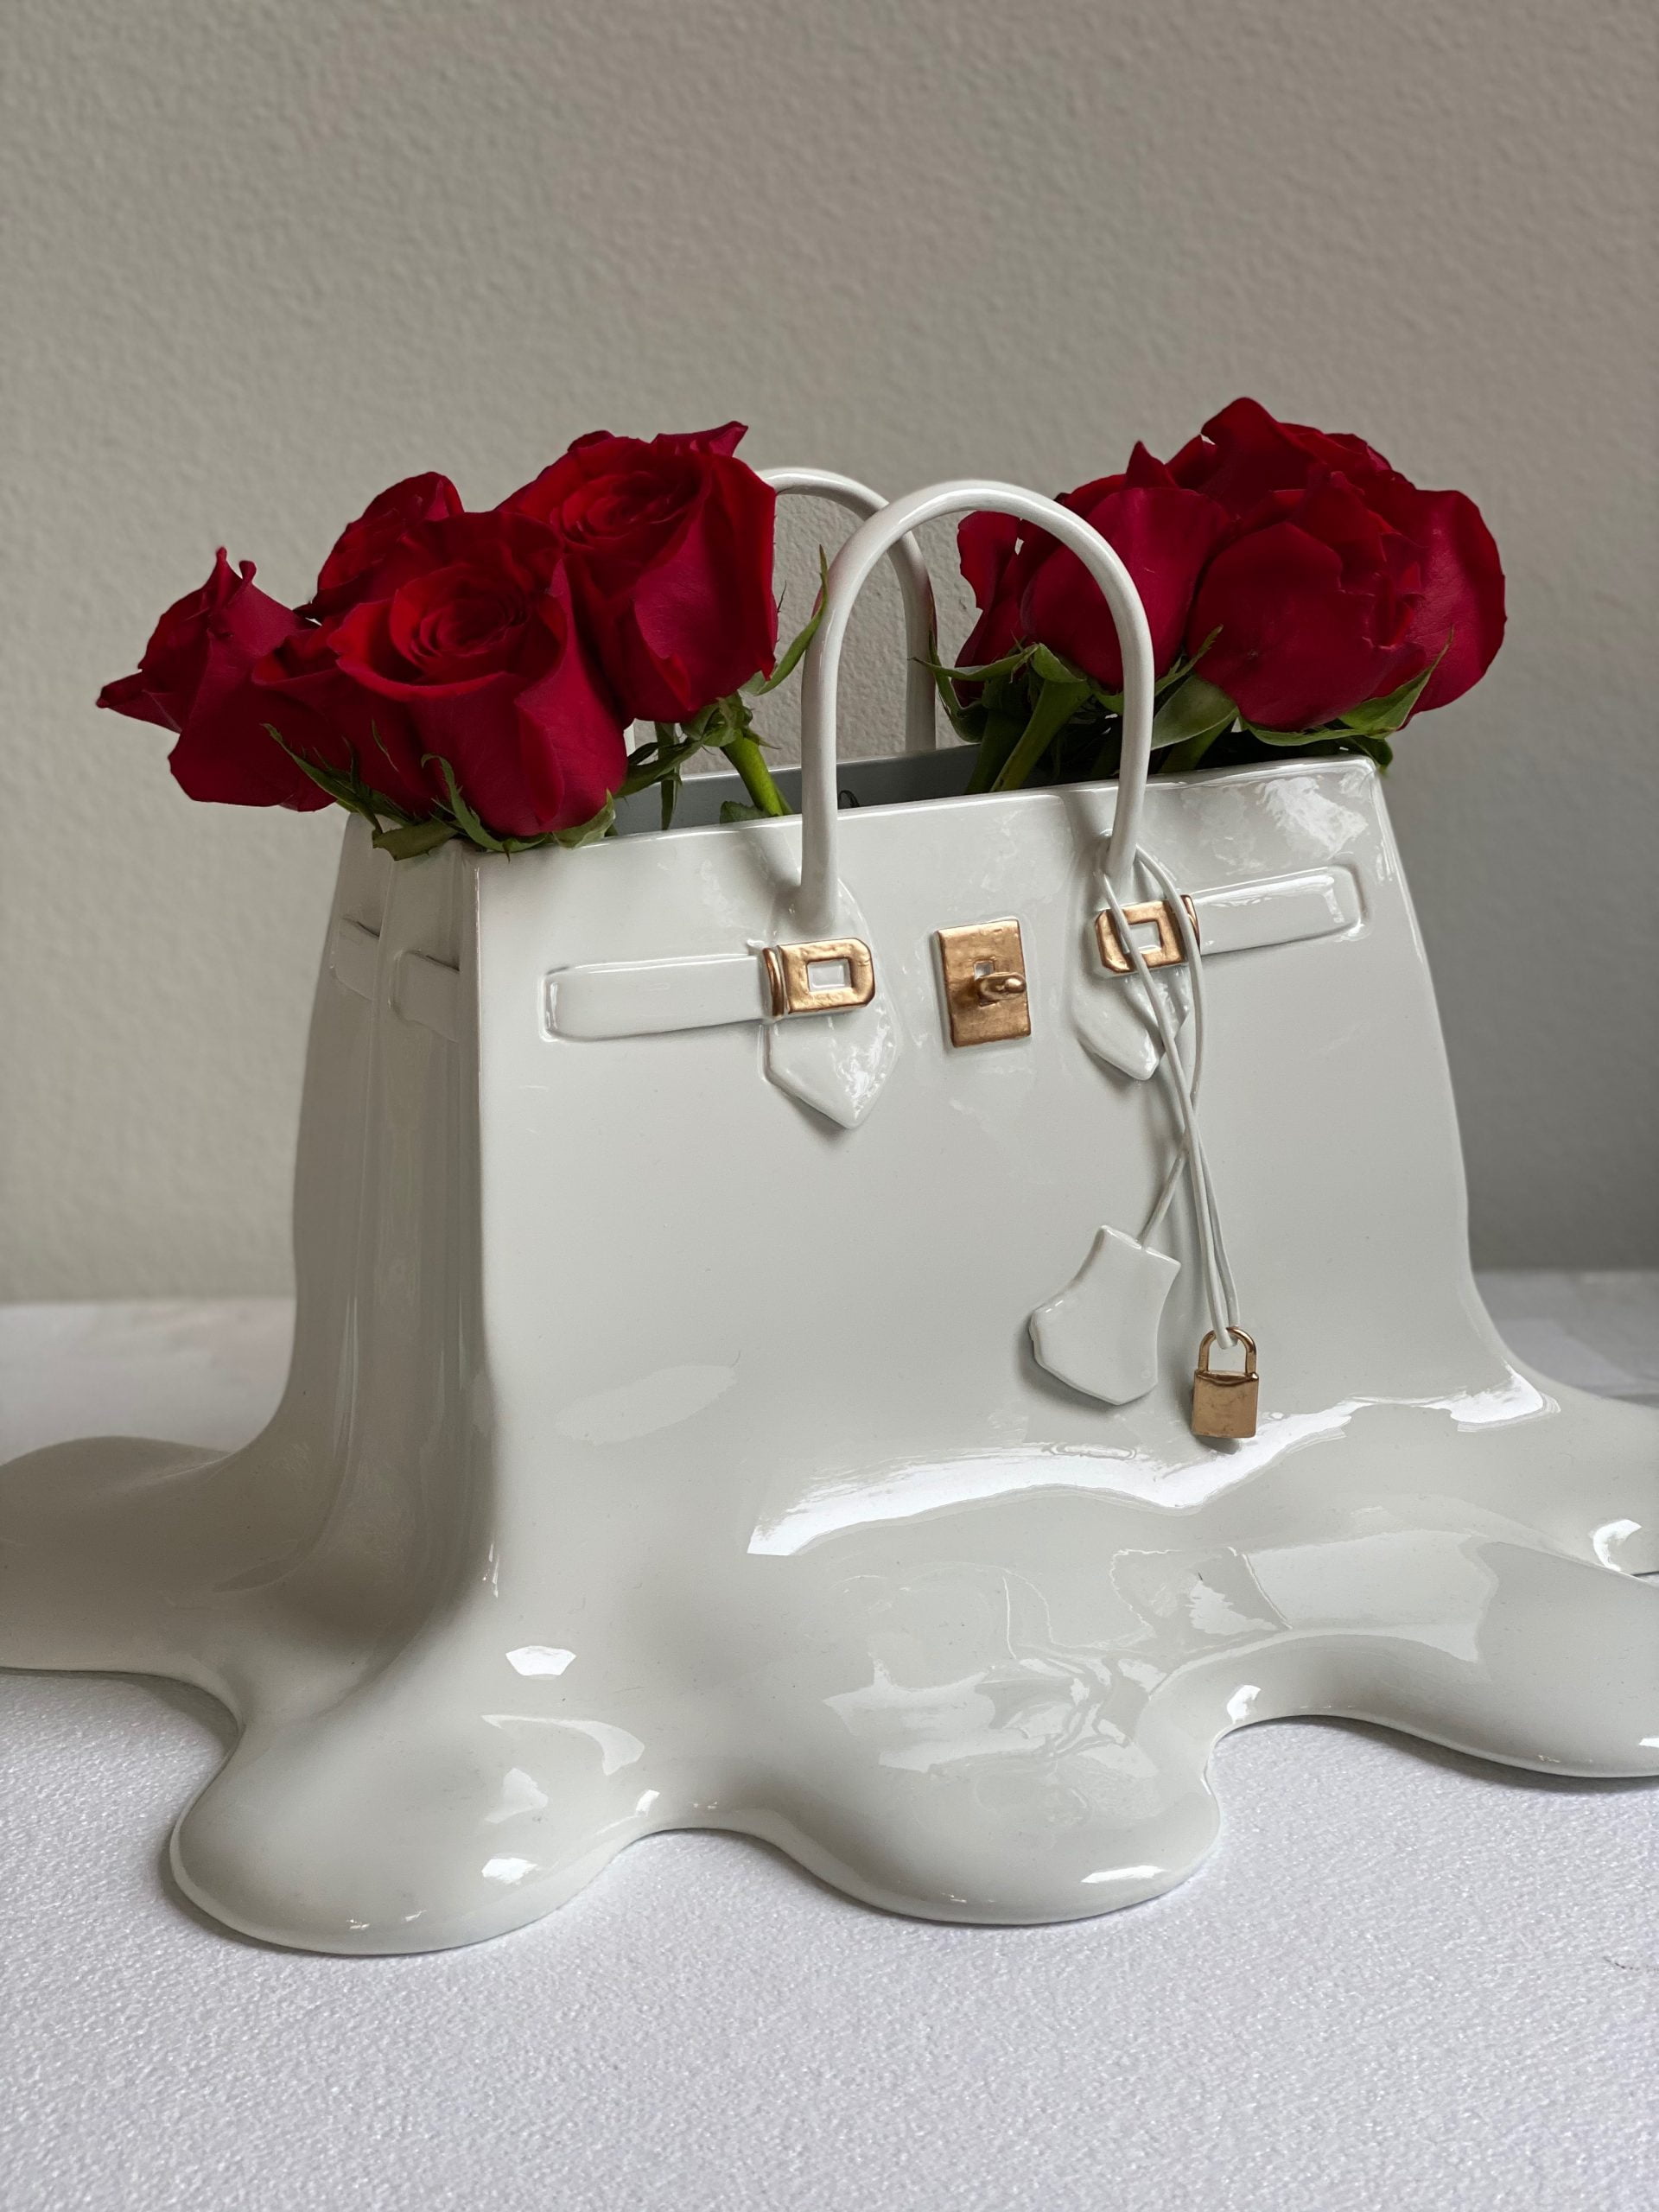 How a cheese sauce stain started Heart's passion for painting Hermes Birkin  bags